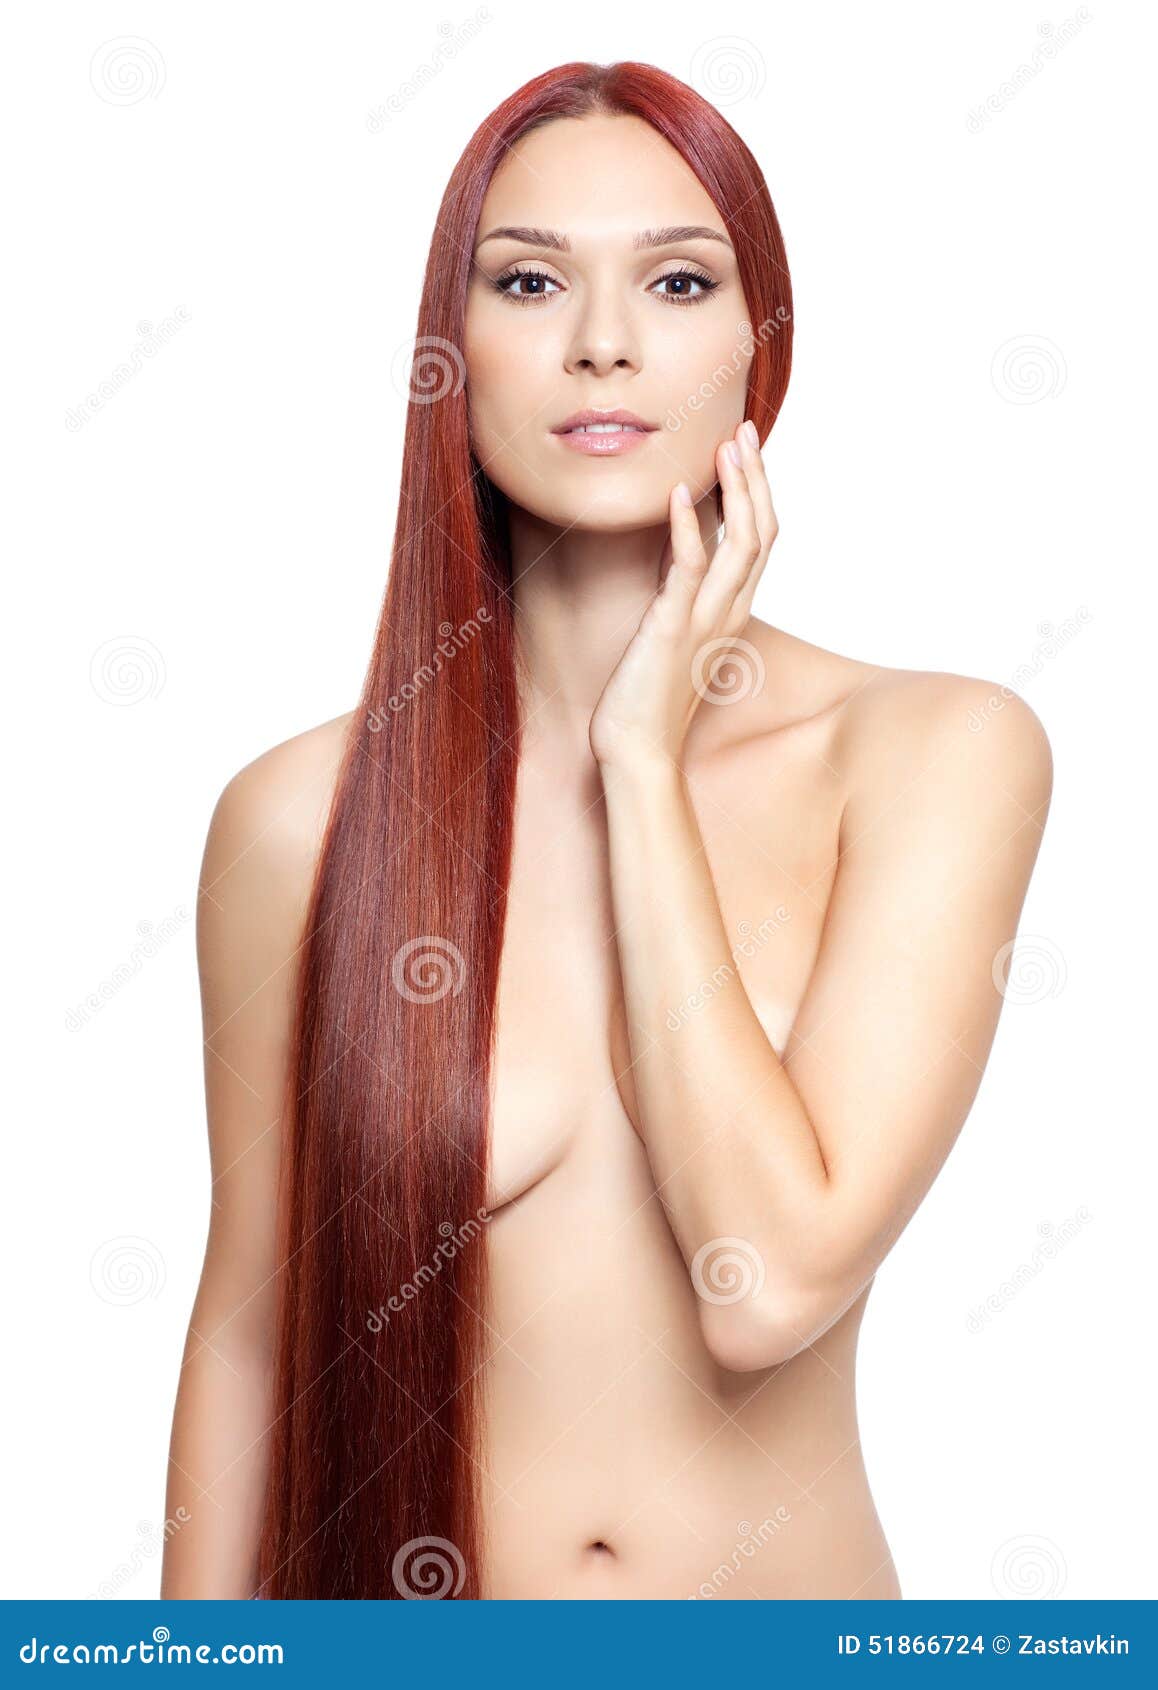 Red hair nude women